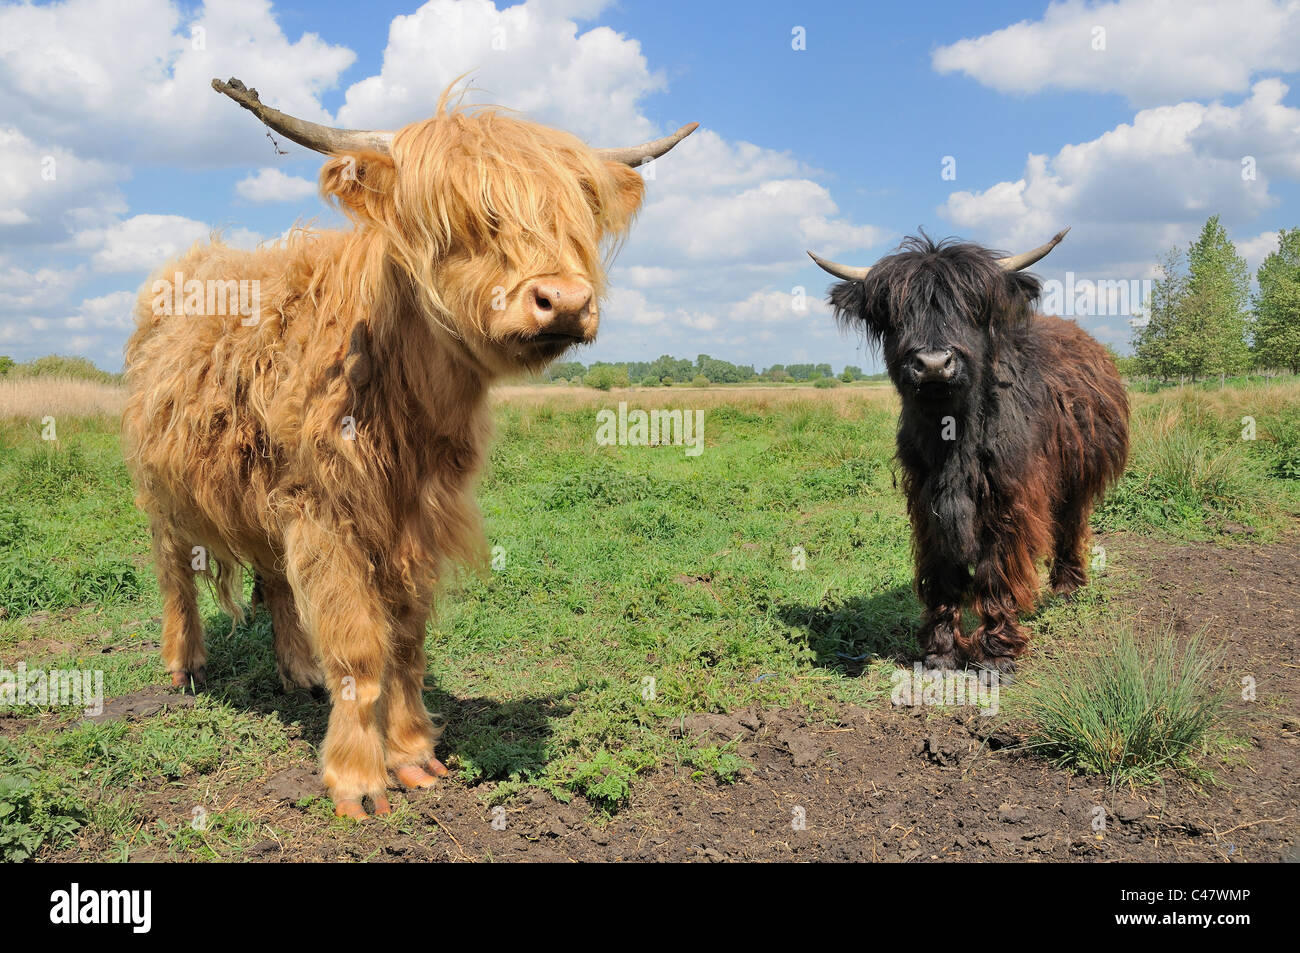 Highland cattle, young calves on lowland pasture, Suffolk, England, May Stock Photo